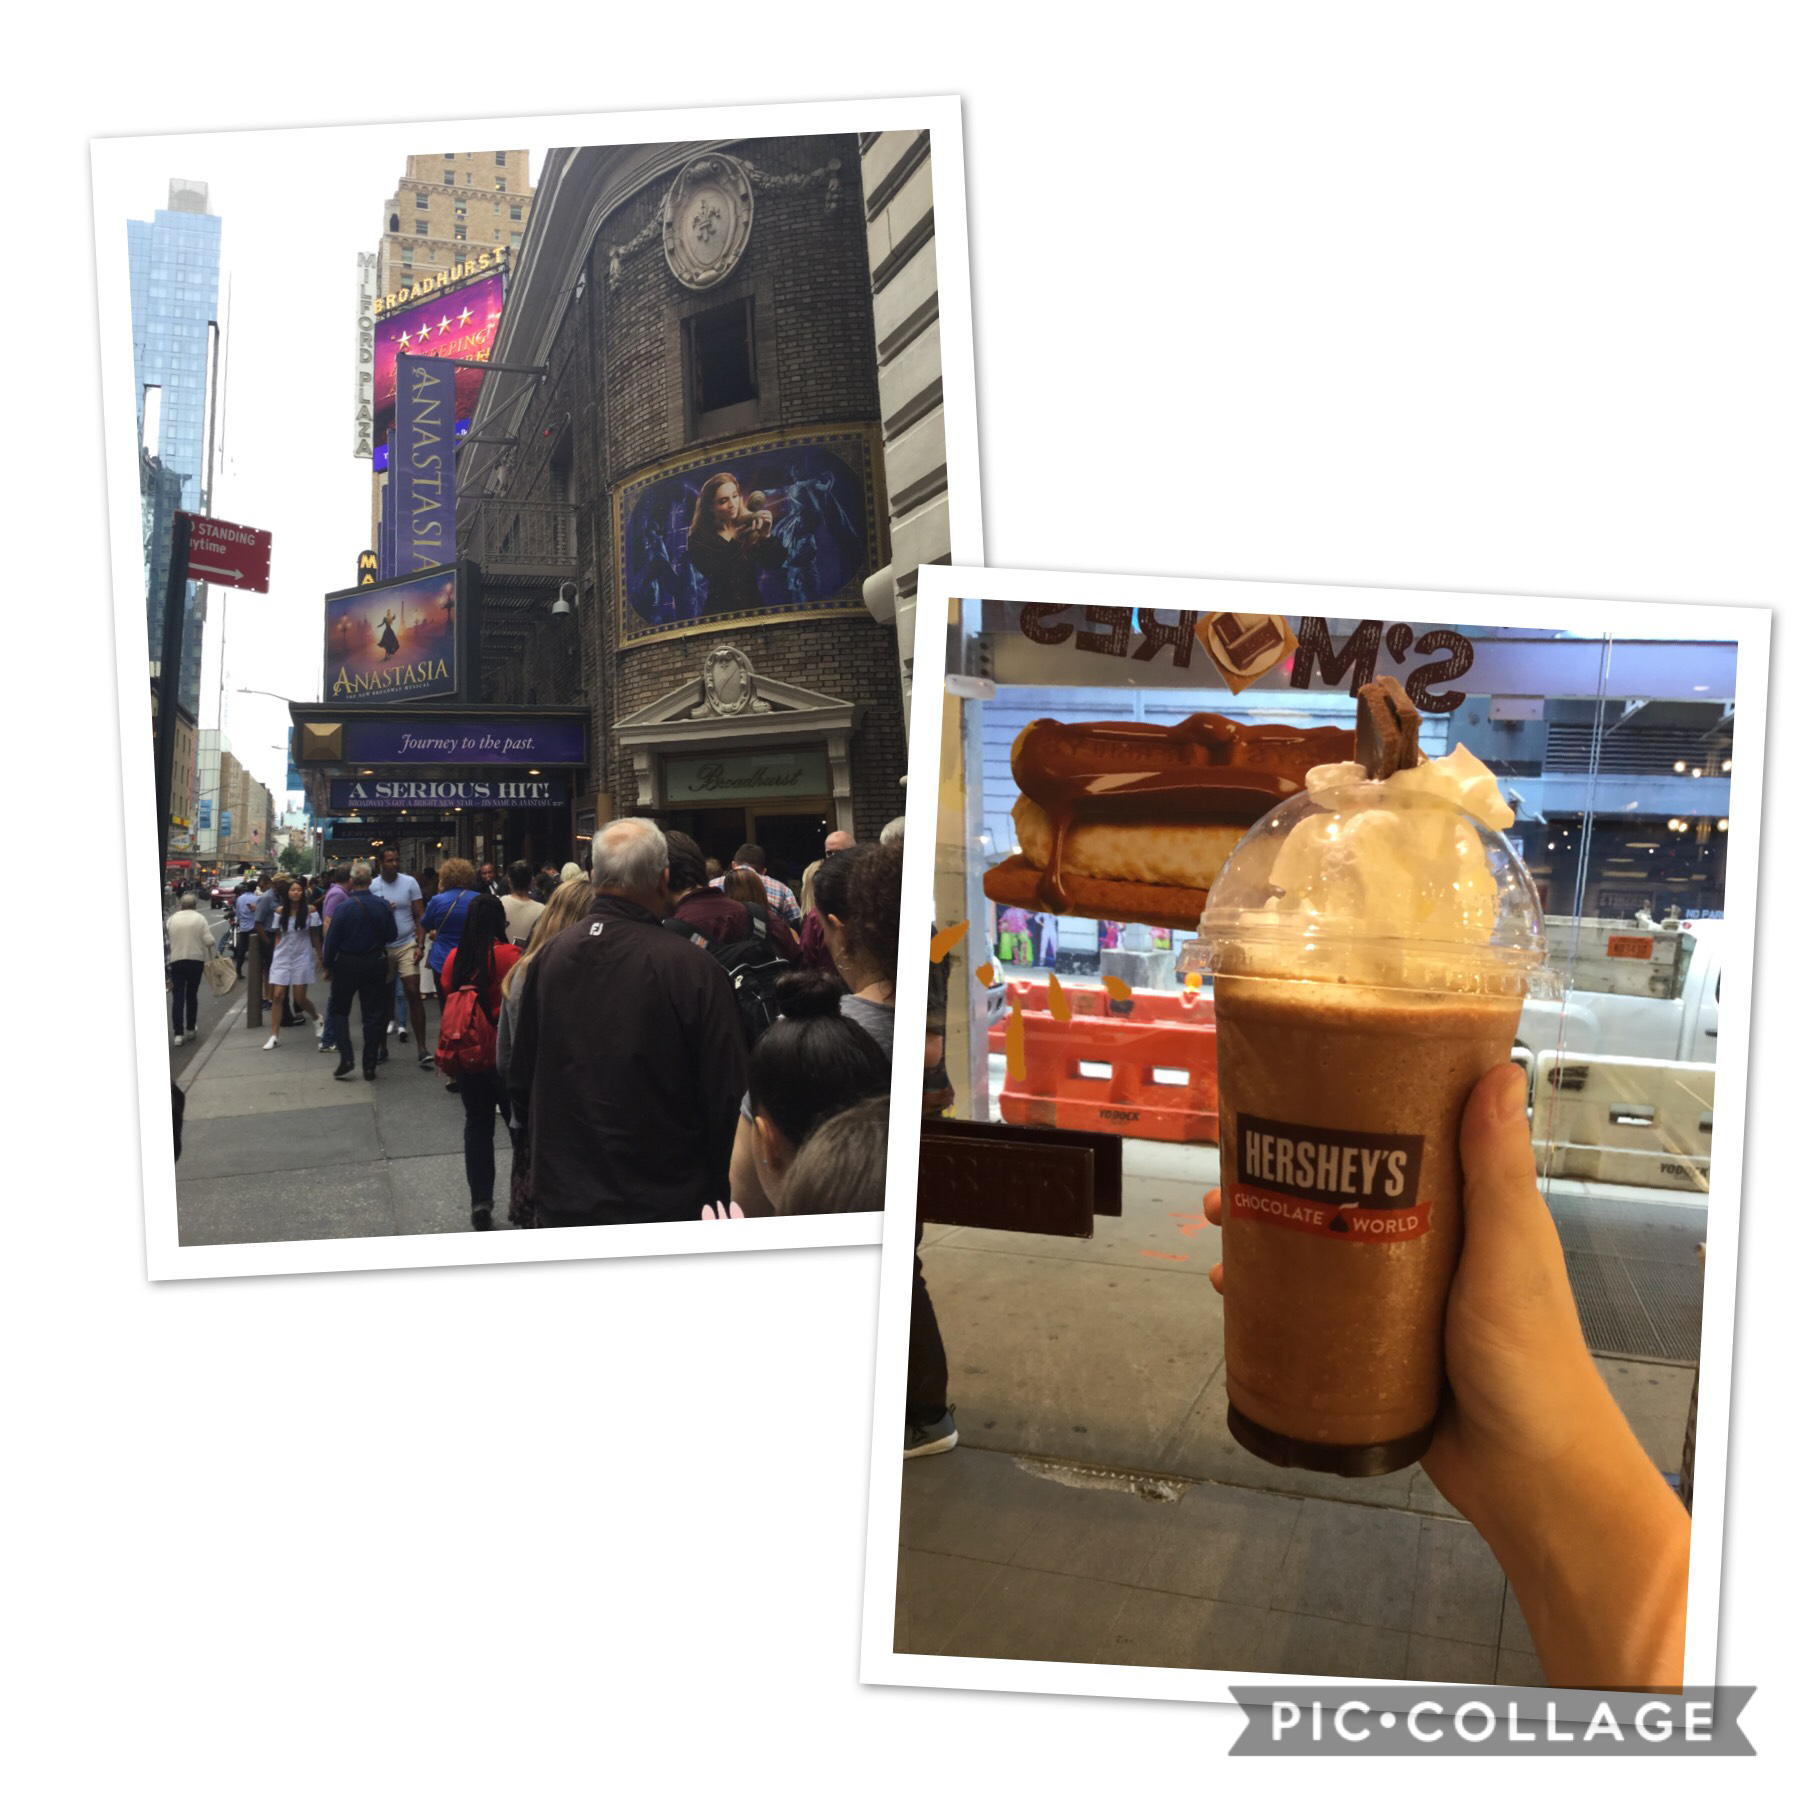 My day today was great... Broadway and frozen hot chocolate